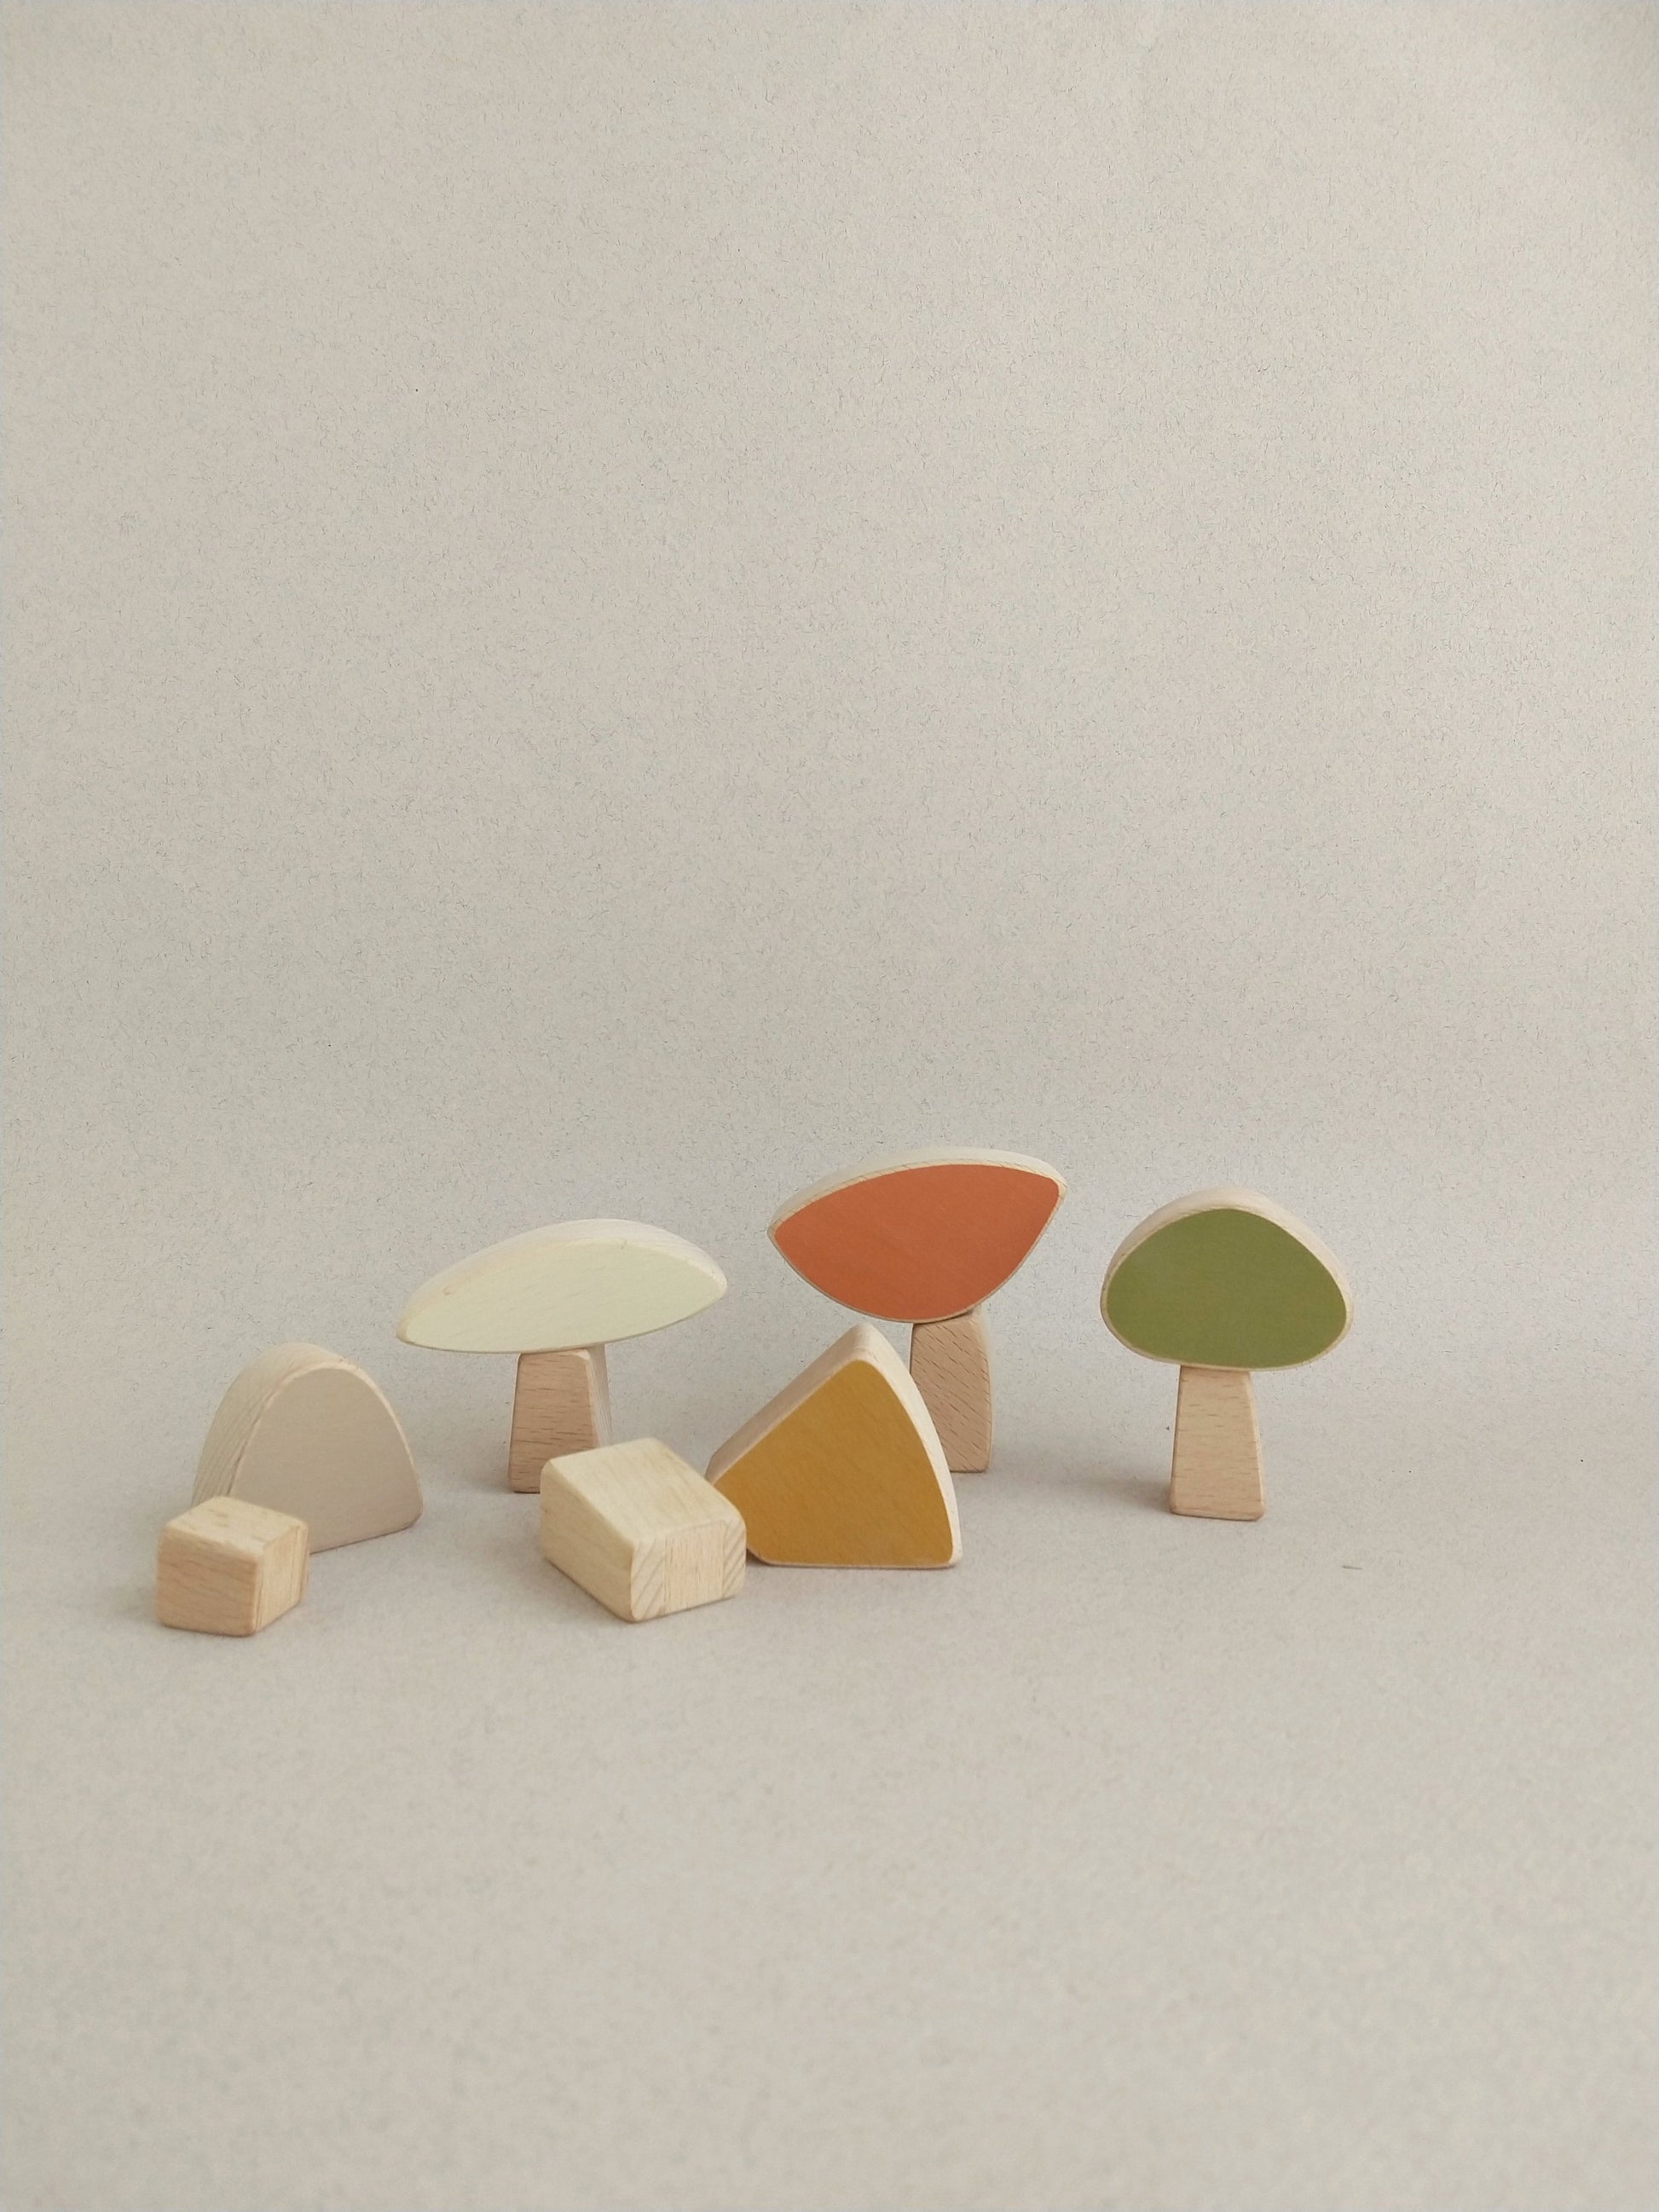 Mushrooms wooden toy set with magnets.